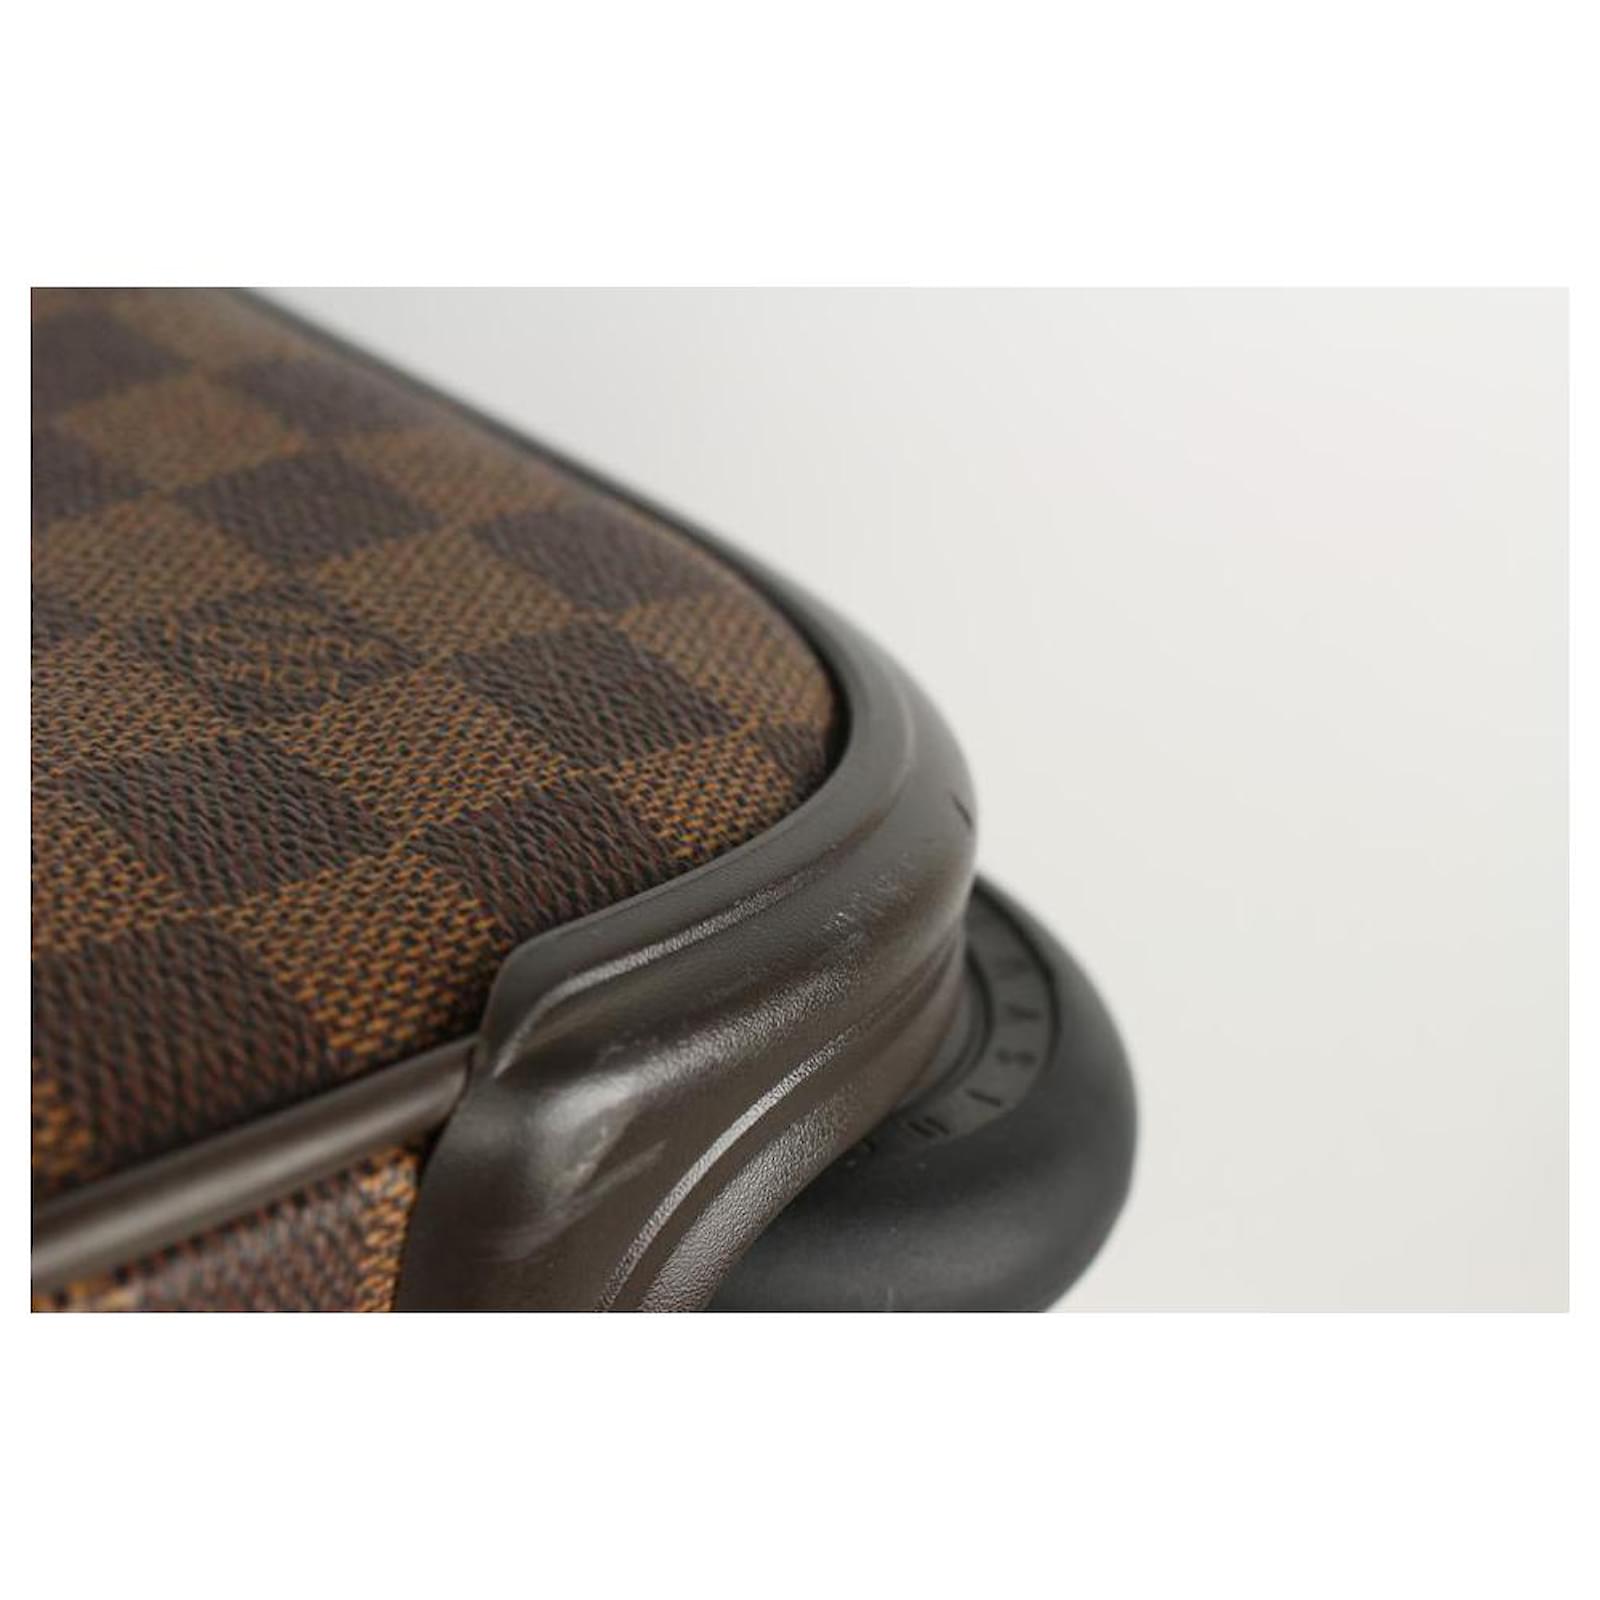 Louis Vuitton Monogram Eole 60 Carry-On With Wheels